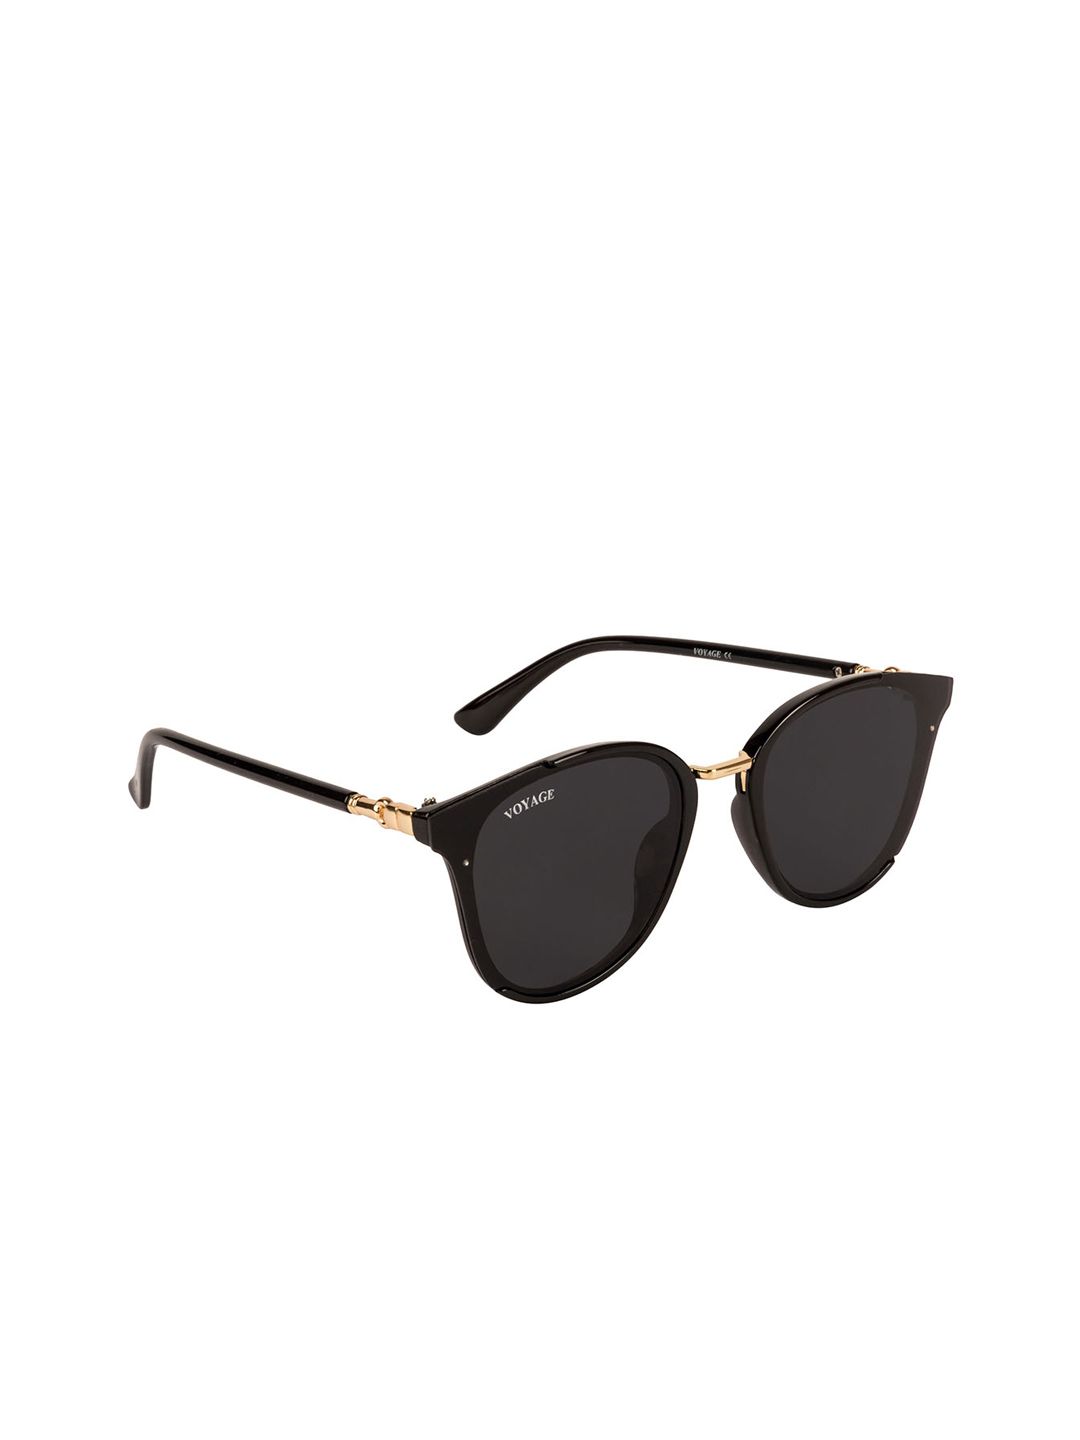 Voyage Women Oval UV Protected Sunglasses B6101MG3175 Price in India